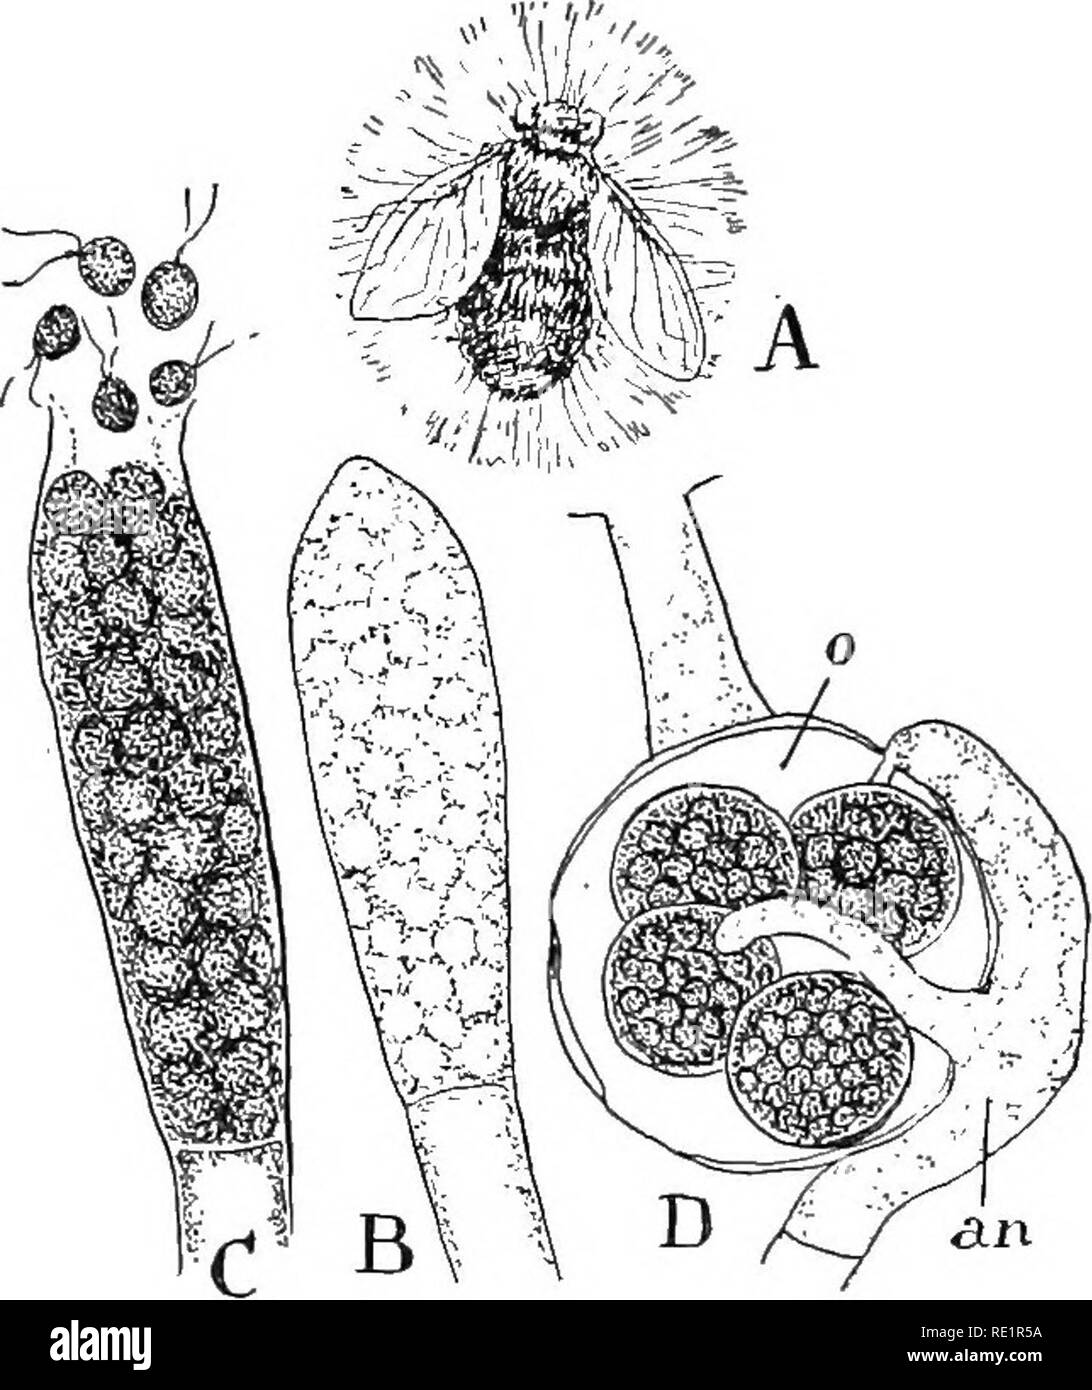 . Nature and development of plants. Botany. DEVELOPMENT OF PLANTS 219 ing tubular threads without partitions but containing numerous nuclei and thus resembling Vaucheria save for the absence of chloroplasts (Fig. 130). The sporangia are also formed by the cutting oif of the tip of one of the branches by a transverse wall. The contents of a sporangium, however, generally breaks up into a very large number of biciliate zoospores (Fig. 130, C). In the species that cause so much damage to fish, the spores come to rest upon the fish and form tubular outgrowths that readily penetrate the tissues of  Stock Photo